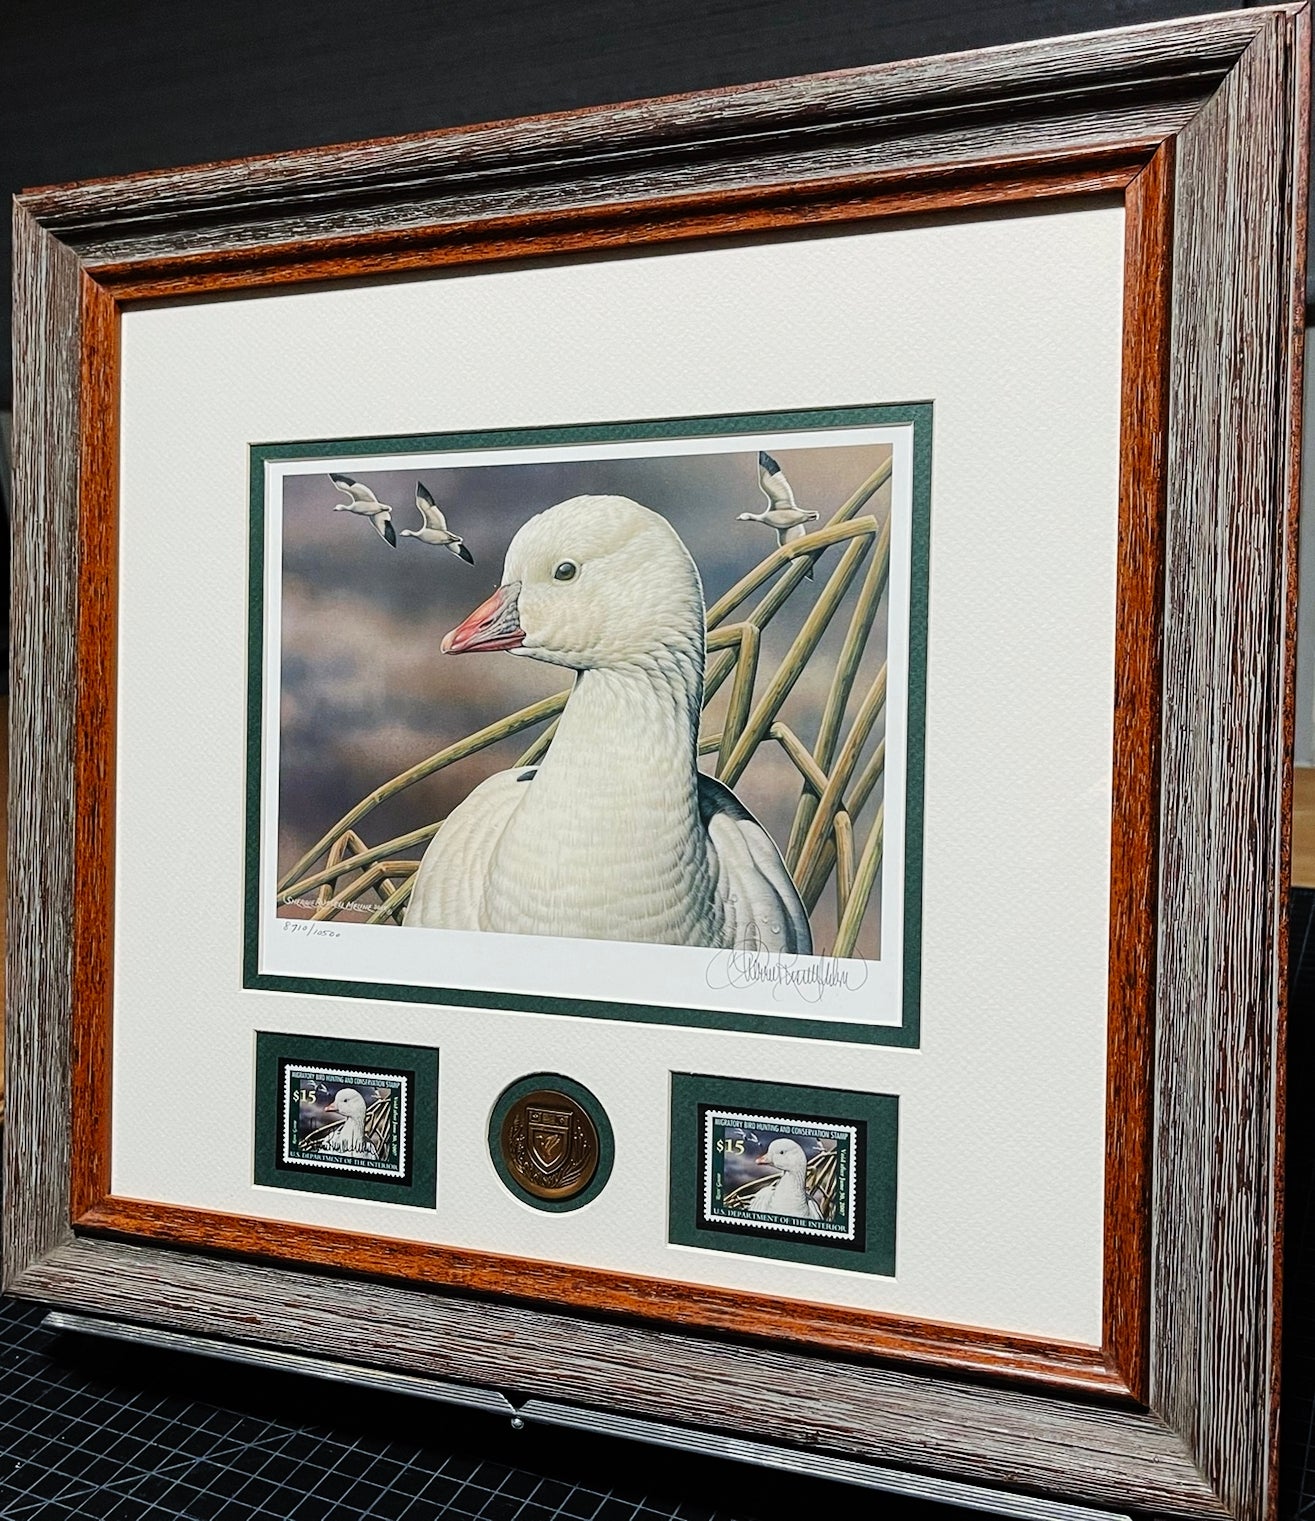 Sherrie Russell Meline 2006 Federal Duck Stamp Print Gold Medallion Edition With Double Stamps - Brand New Custom Sporting Frame